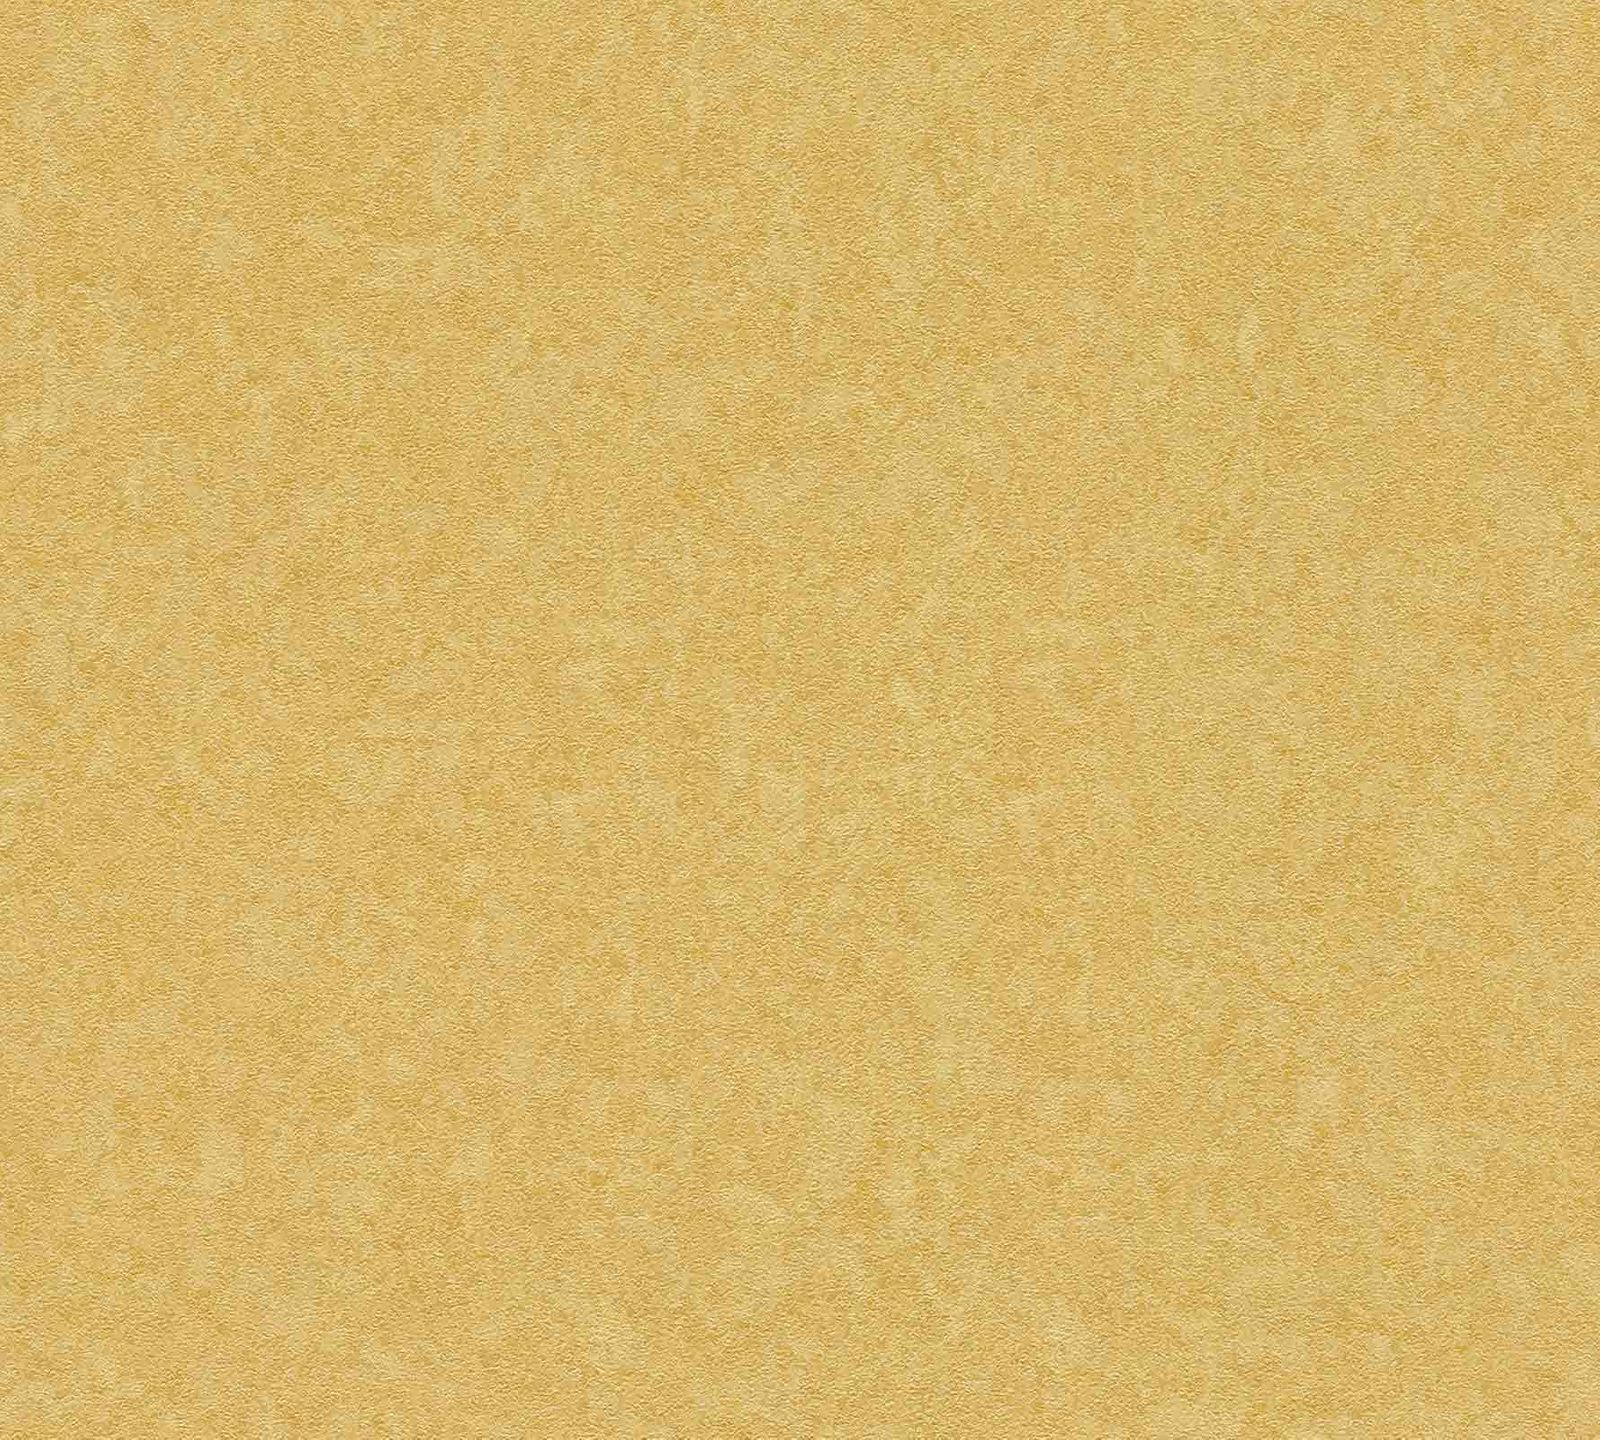 File:Gold metallic finish clean smooth seamless metal surface sheet  texture.jpg - Wikimedia Commons